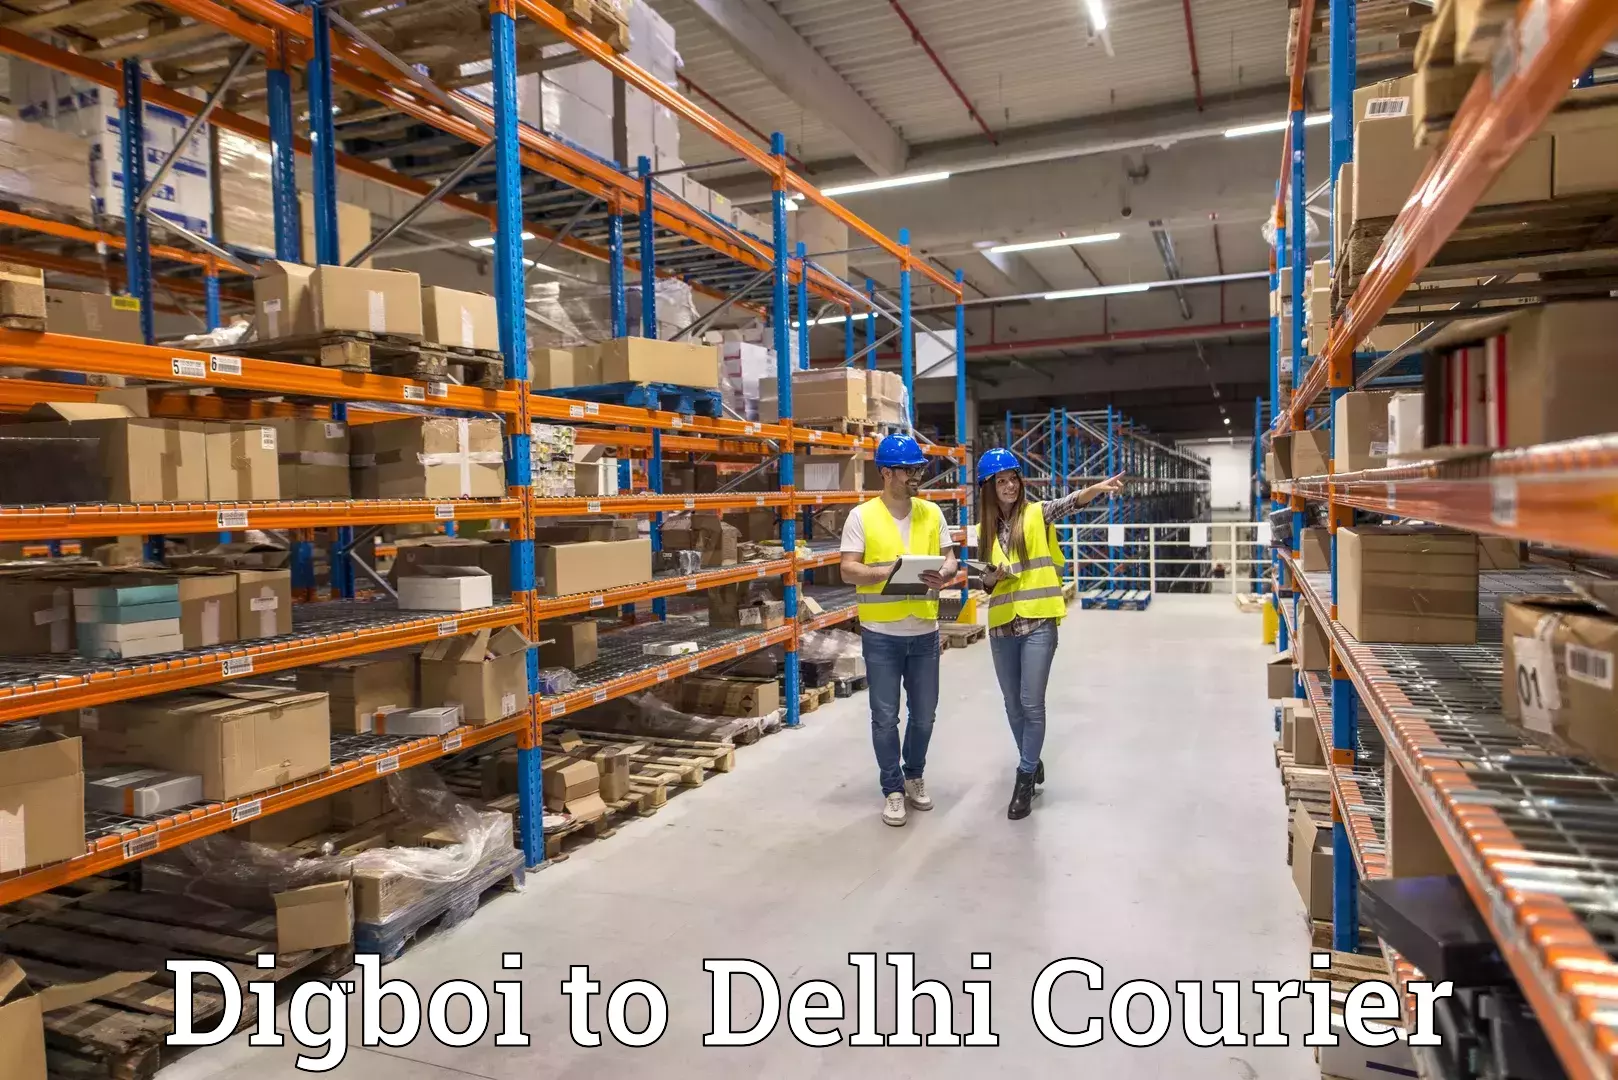 Customer-focused courier Digboi to University of Delhi